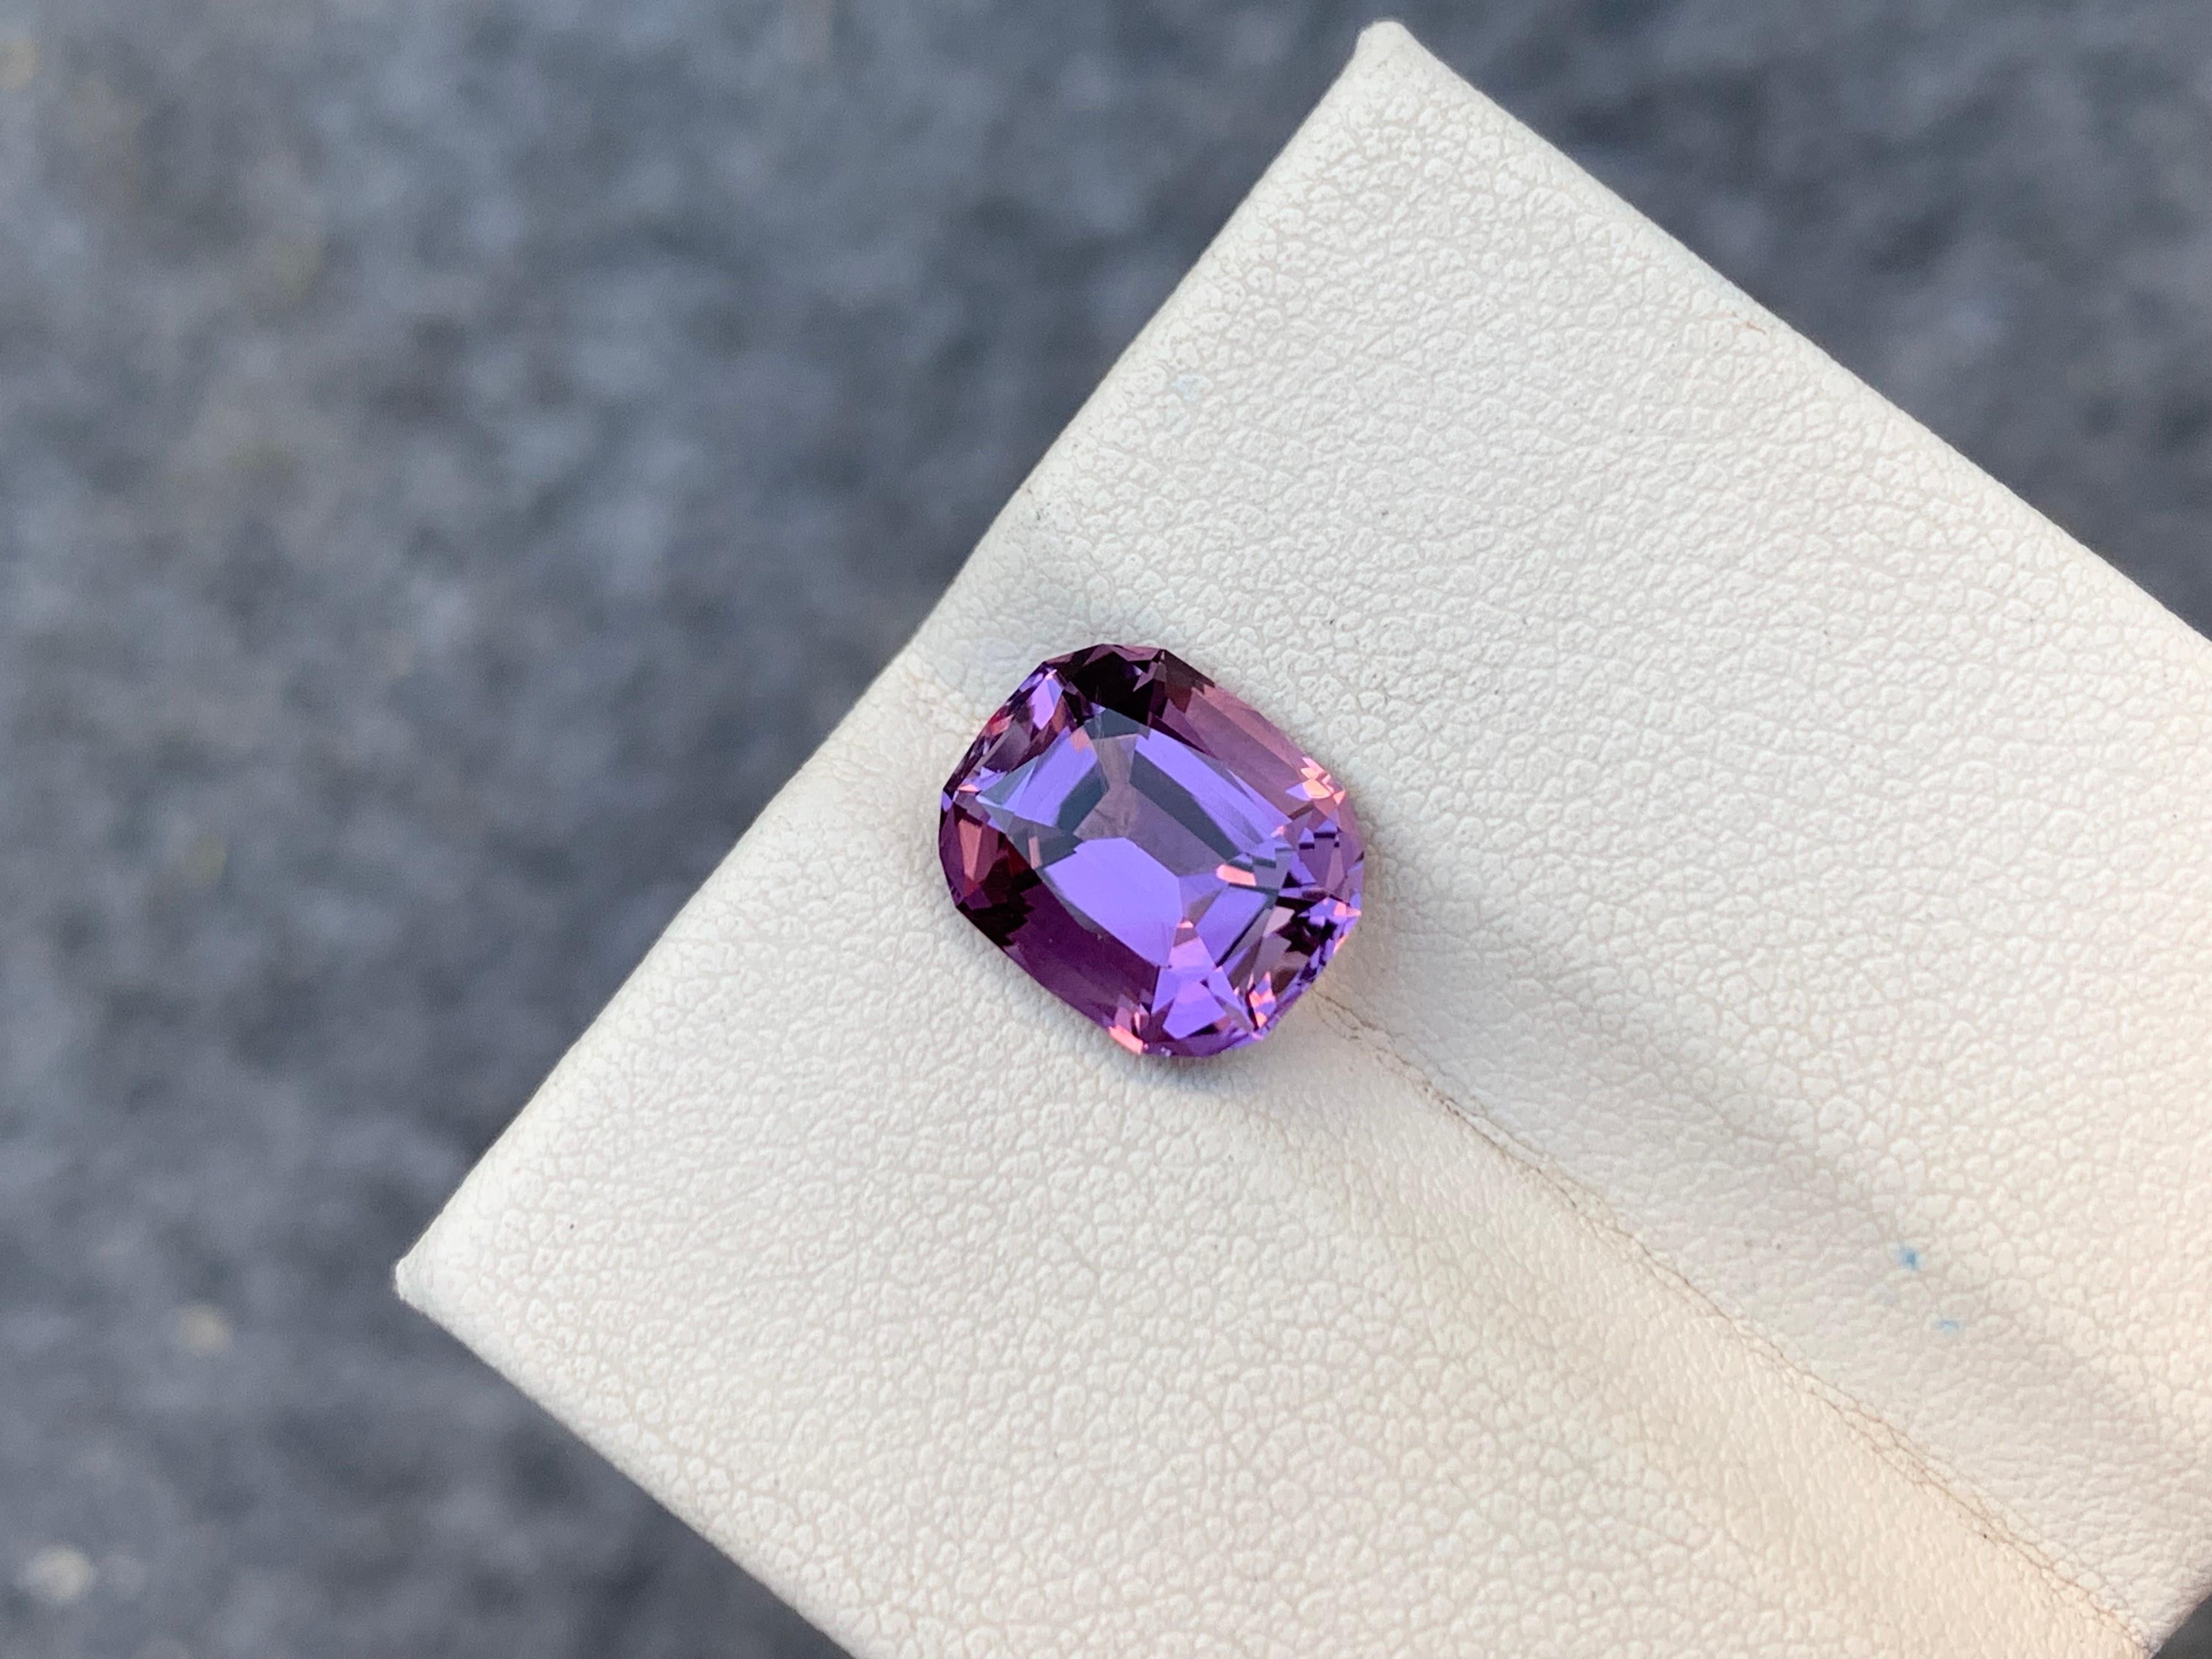 Cushion Cut 3.35 Carat Natural Loose Amethyst Cushion Shape Gem For Jewellery Making  For Sale